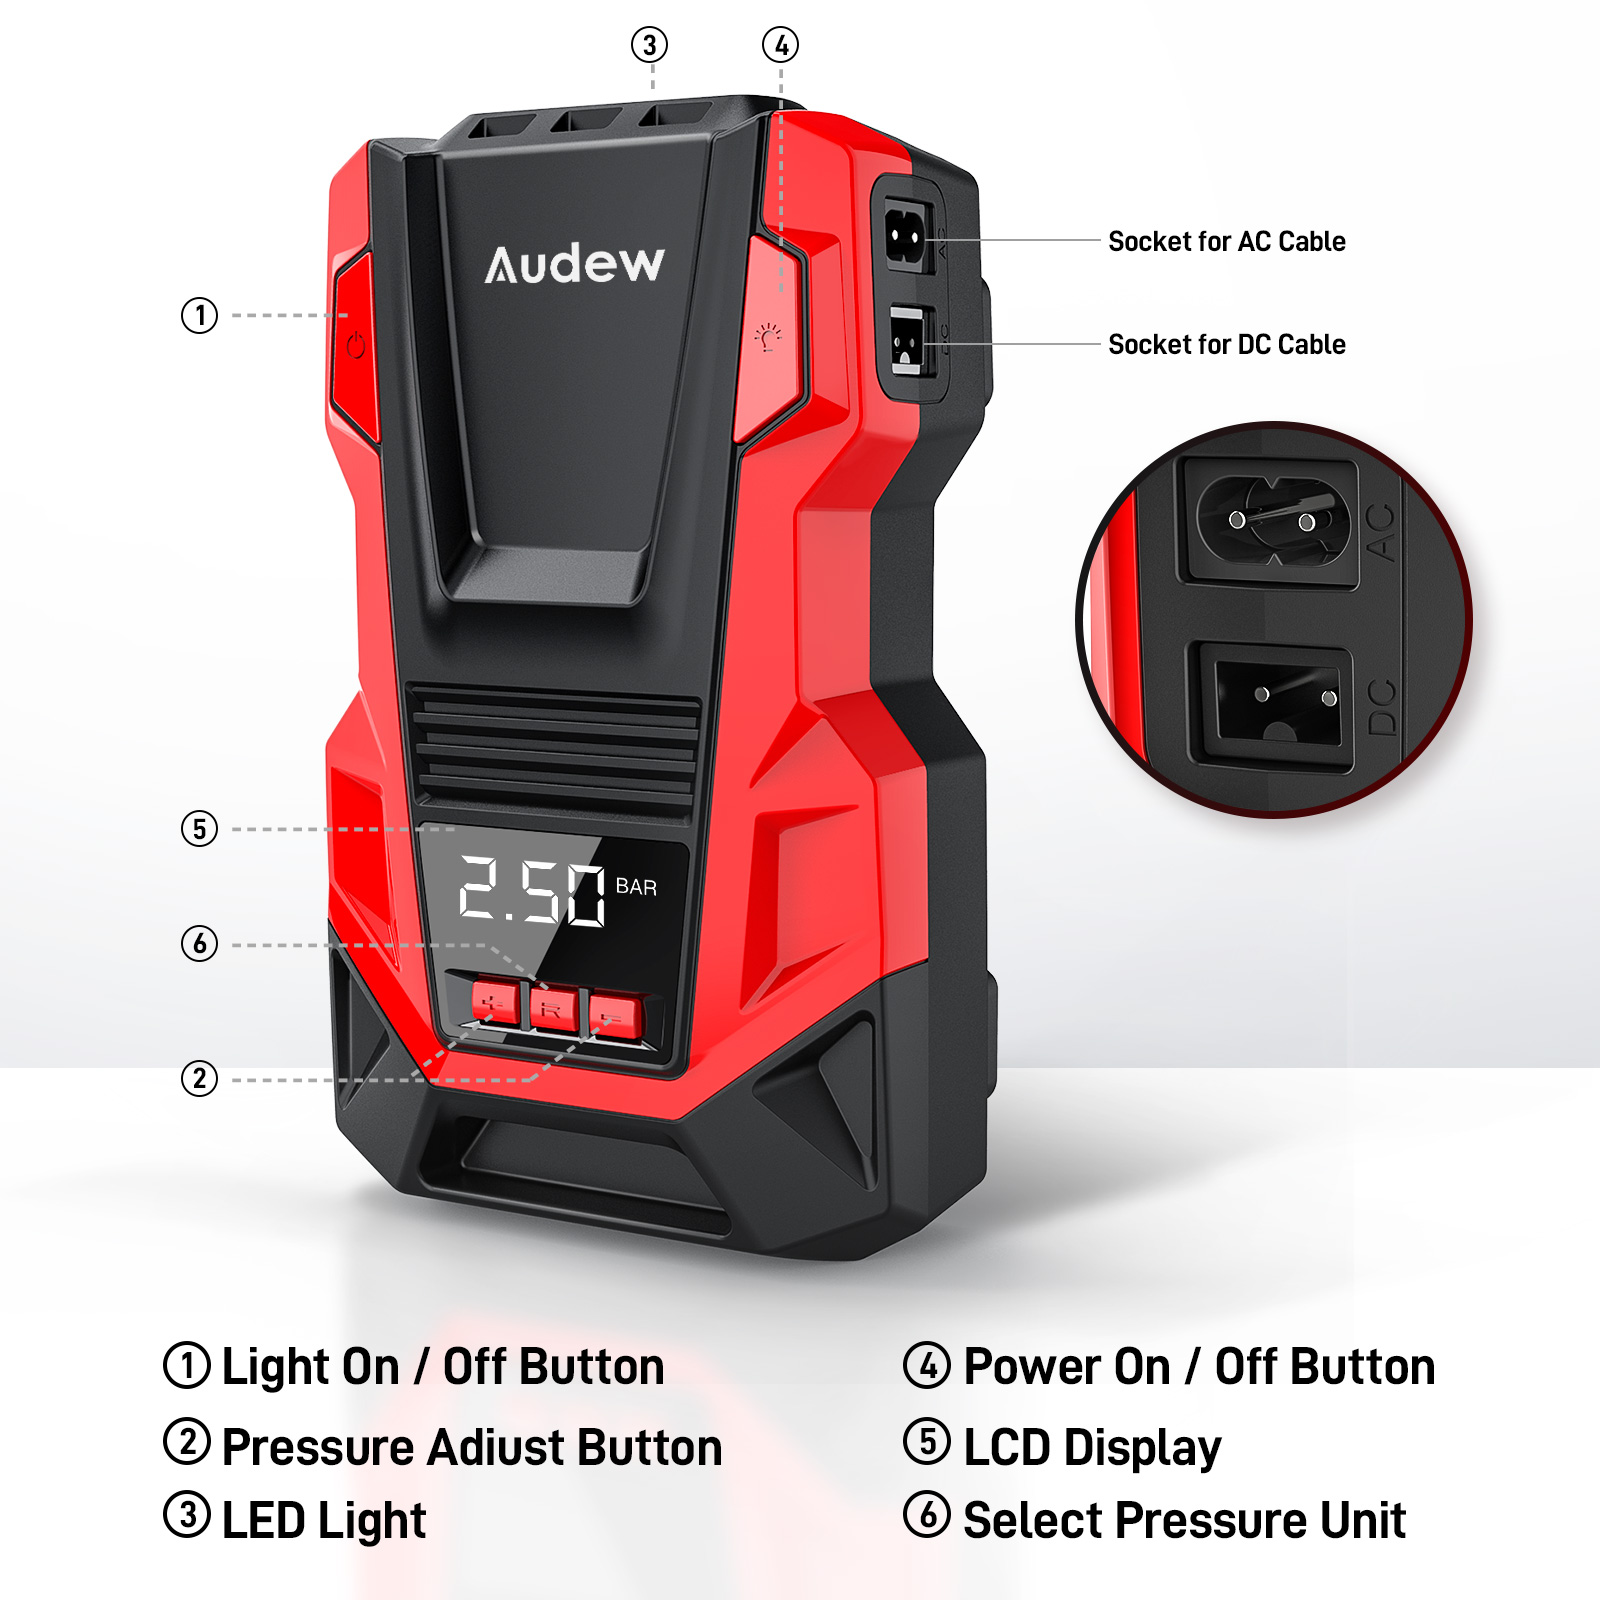 Audew-ACDC-Portable-Digital-Air-Pump-Tire-Inflator-Air-Compressor-with-Automatic-Display-For-Car-Bic-1835433-3